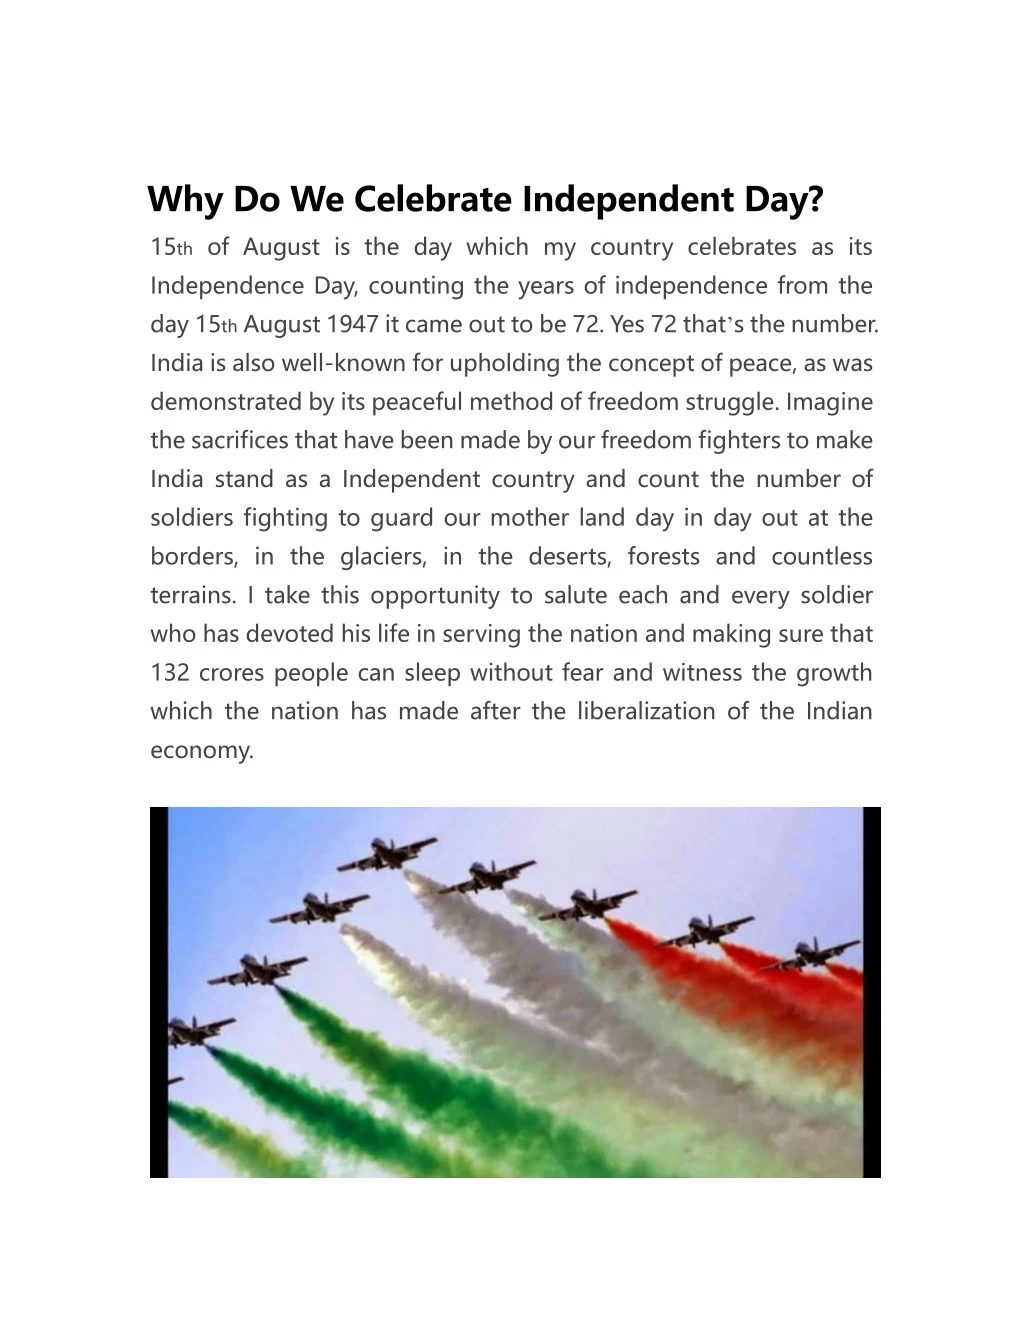 why do we celebrate independent